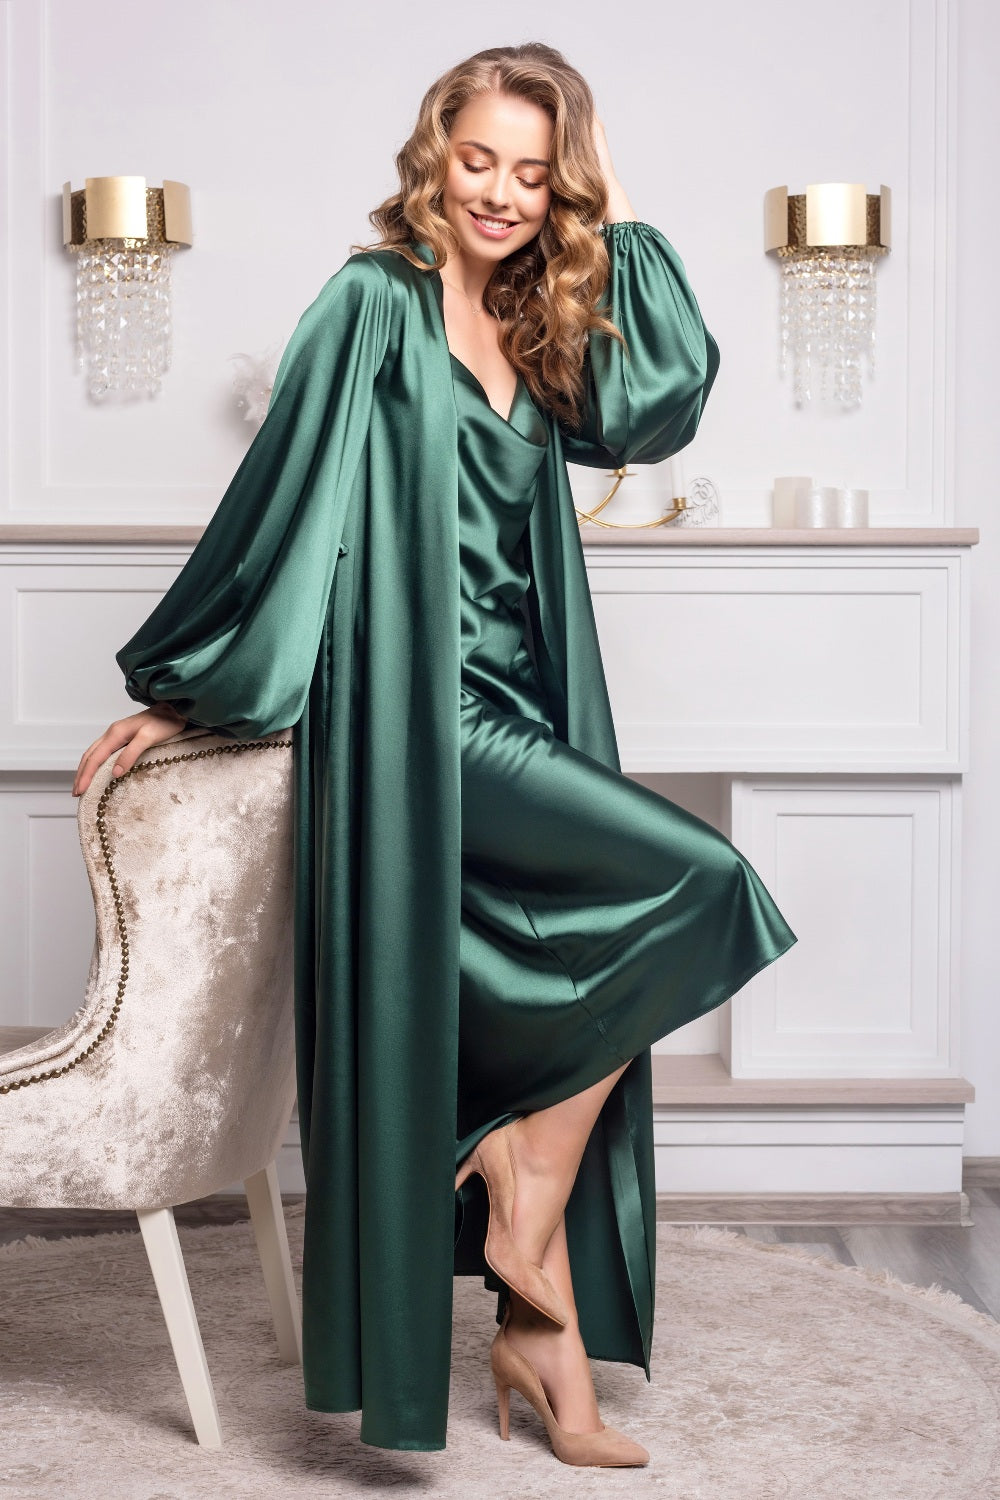 Feel like royalty in this enchanting green satin nightgown and robe set